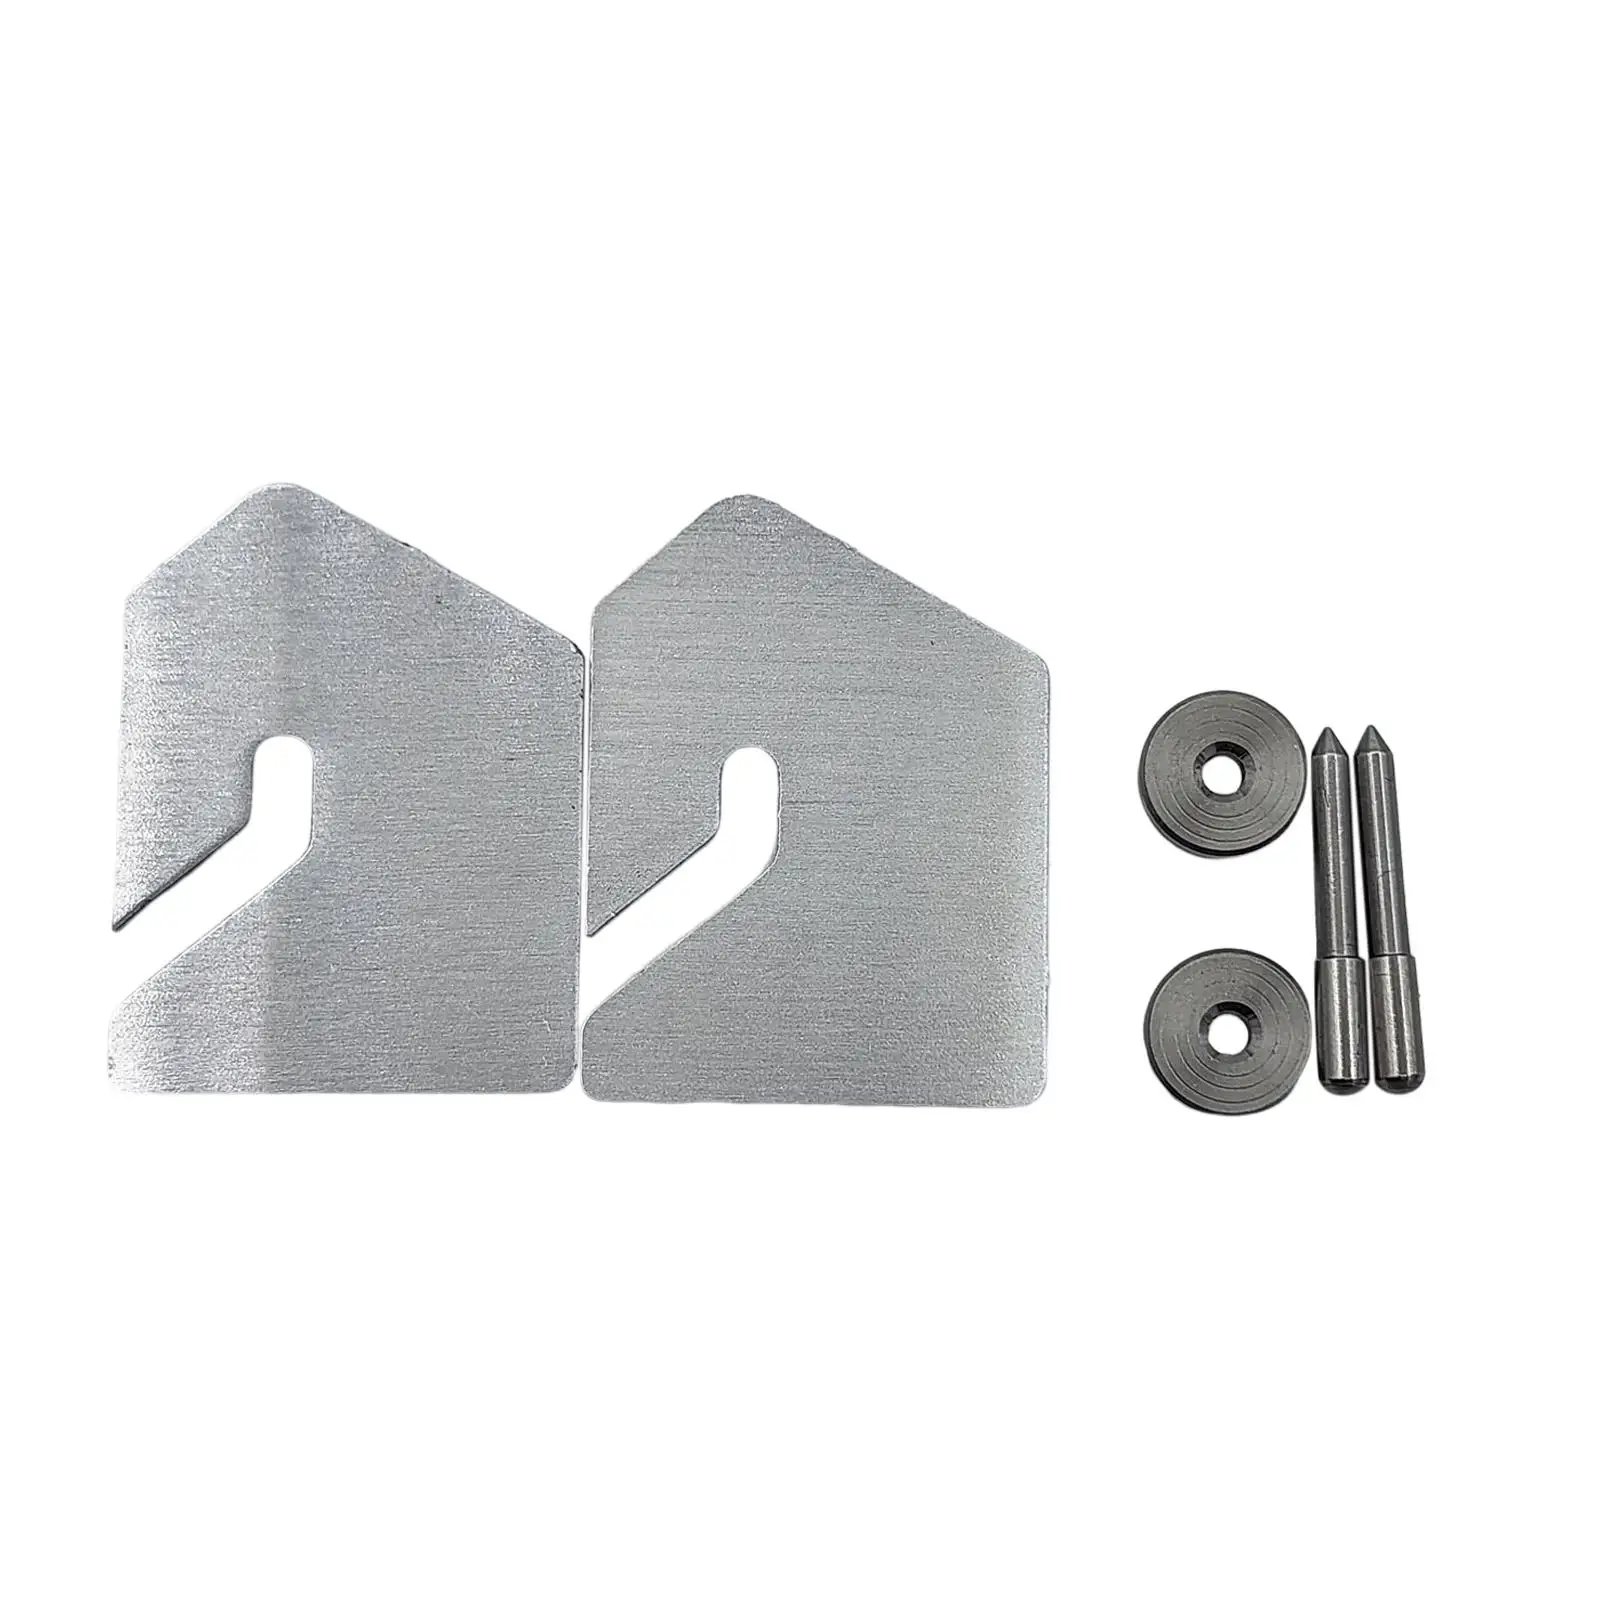 2 Cover Total Hinge Repair Kit Pins Spacers Hinge Set for 0 145 165 Direct fit, no modification requires, easy installation